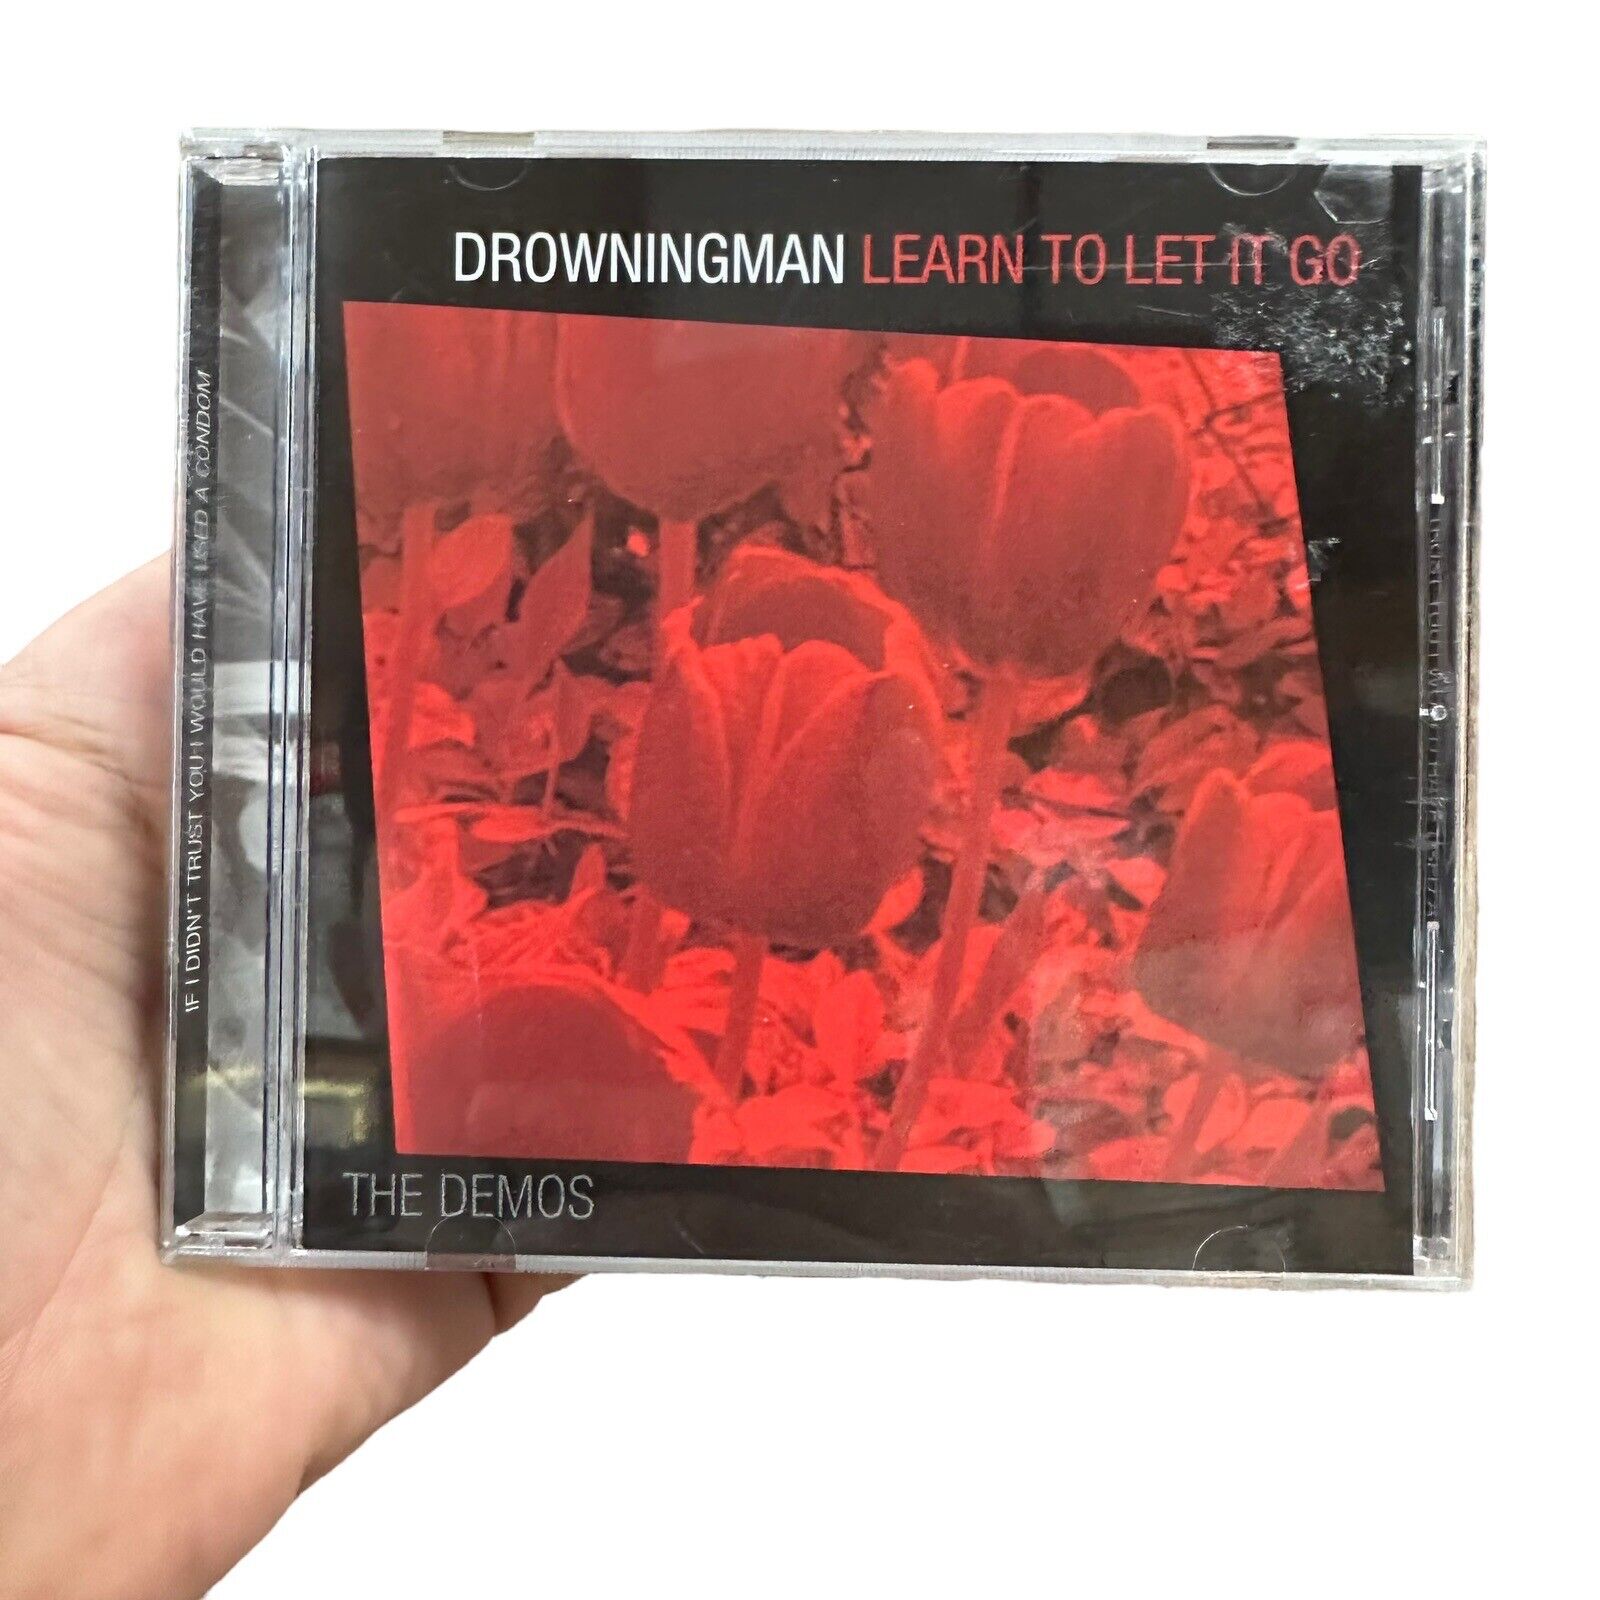 DROWNINGMAN: LEARN TO LET IT GO: THE DEMOS [CD] 2004 Law Of Inertia